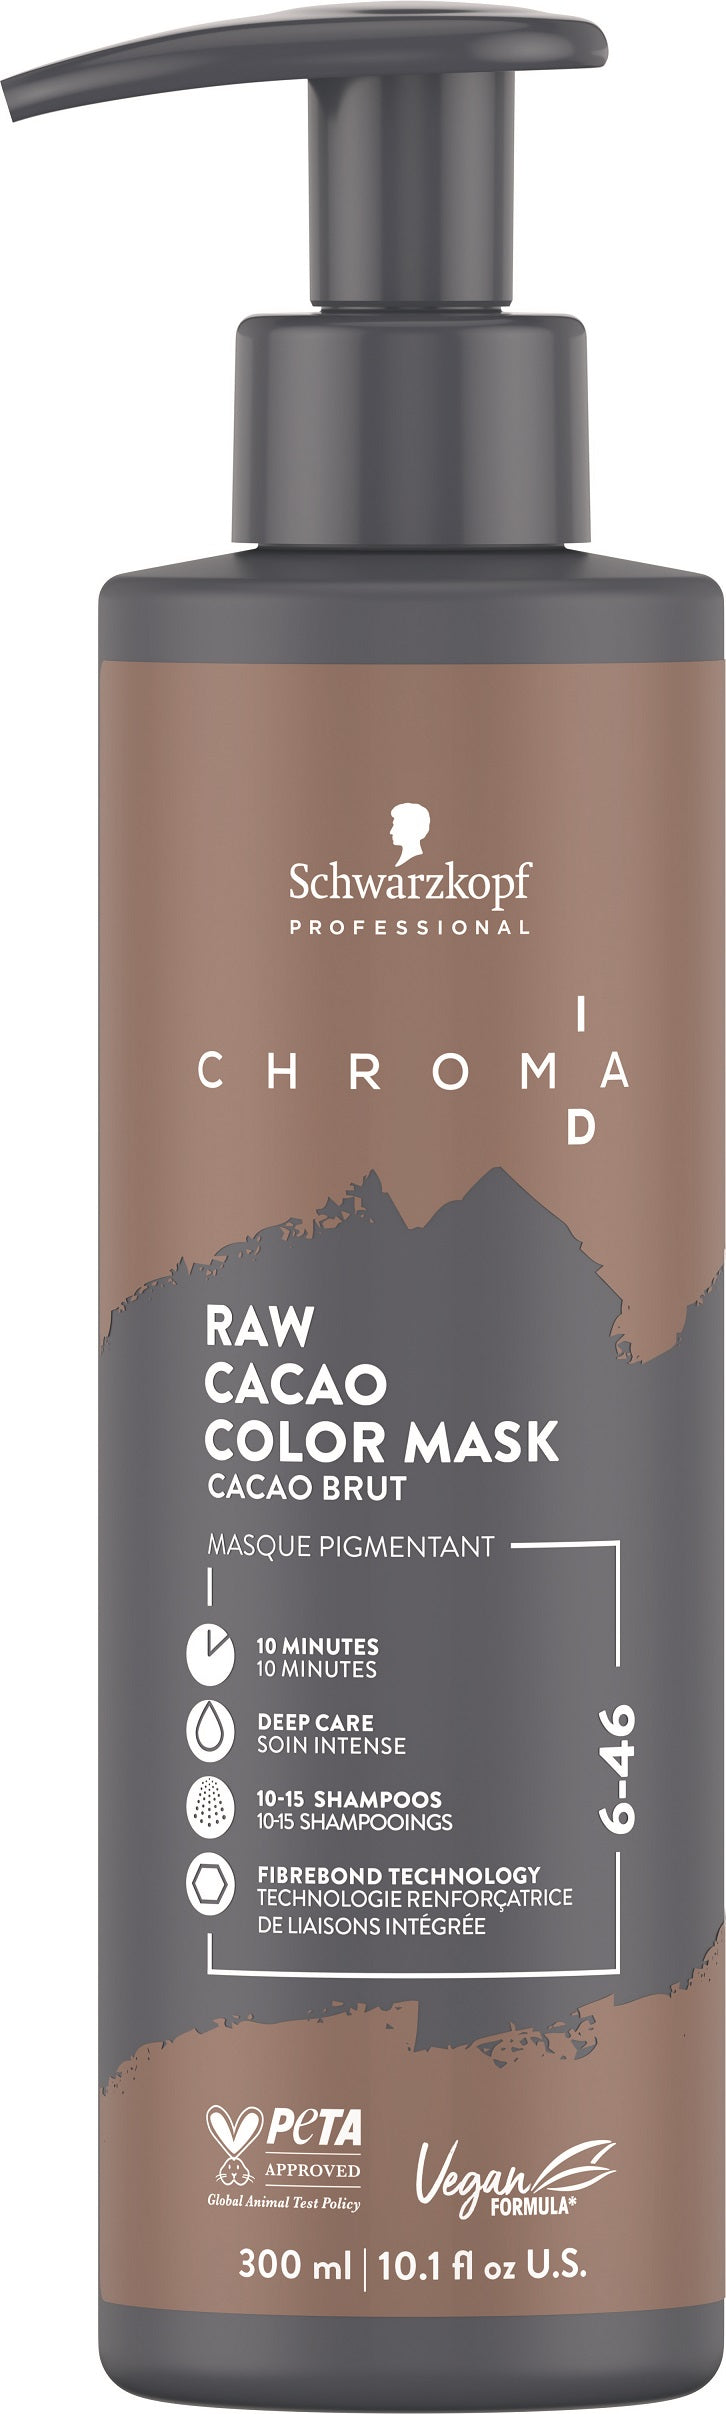 Schwarzkopf Professional Chroma ID 6-46 Raw Cacao Bonding Color Mask at Eds Hair Bramhall